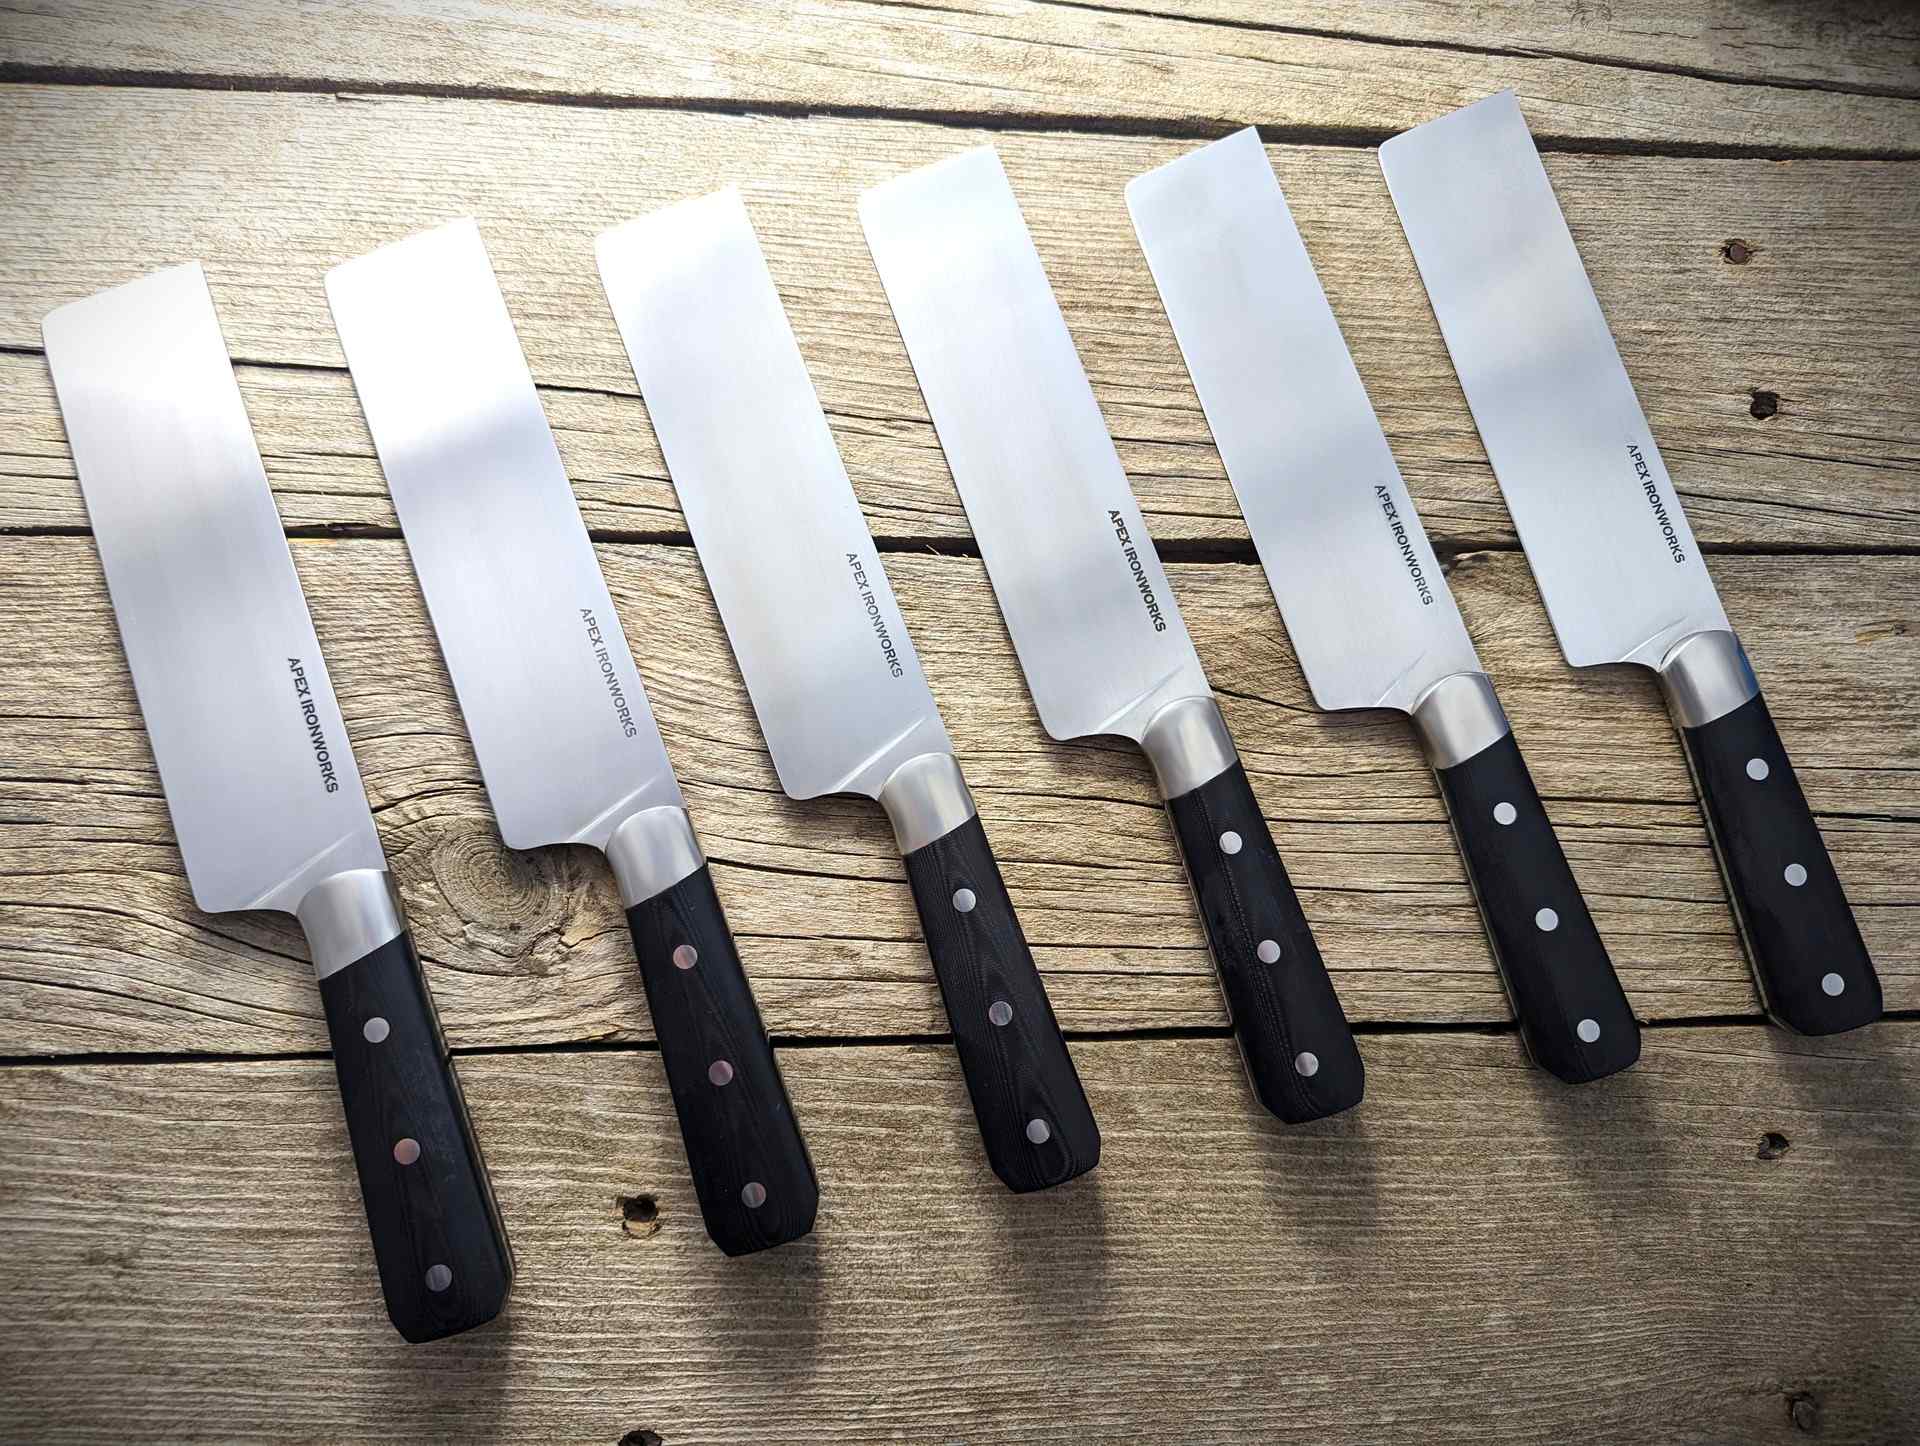 Batch of 6 Apex Steel Works S35VN Nakiri Chef's Knives with black linen micarta handle scales and stainless bolsters otherwise known as a nakiri knife